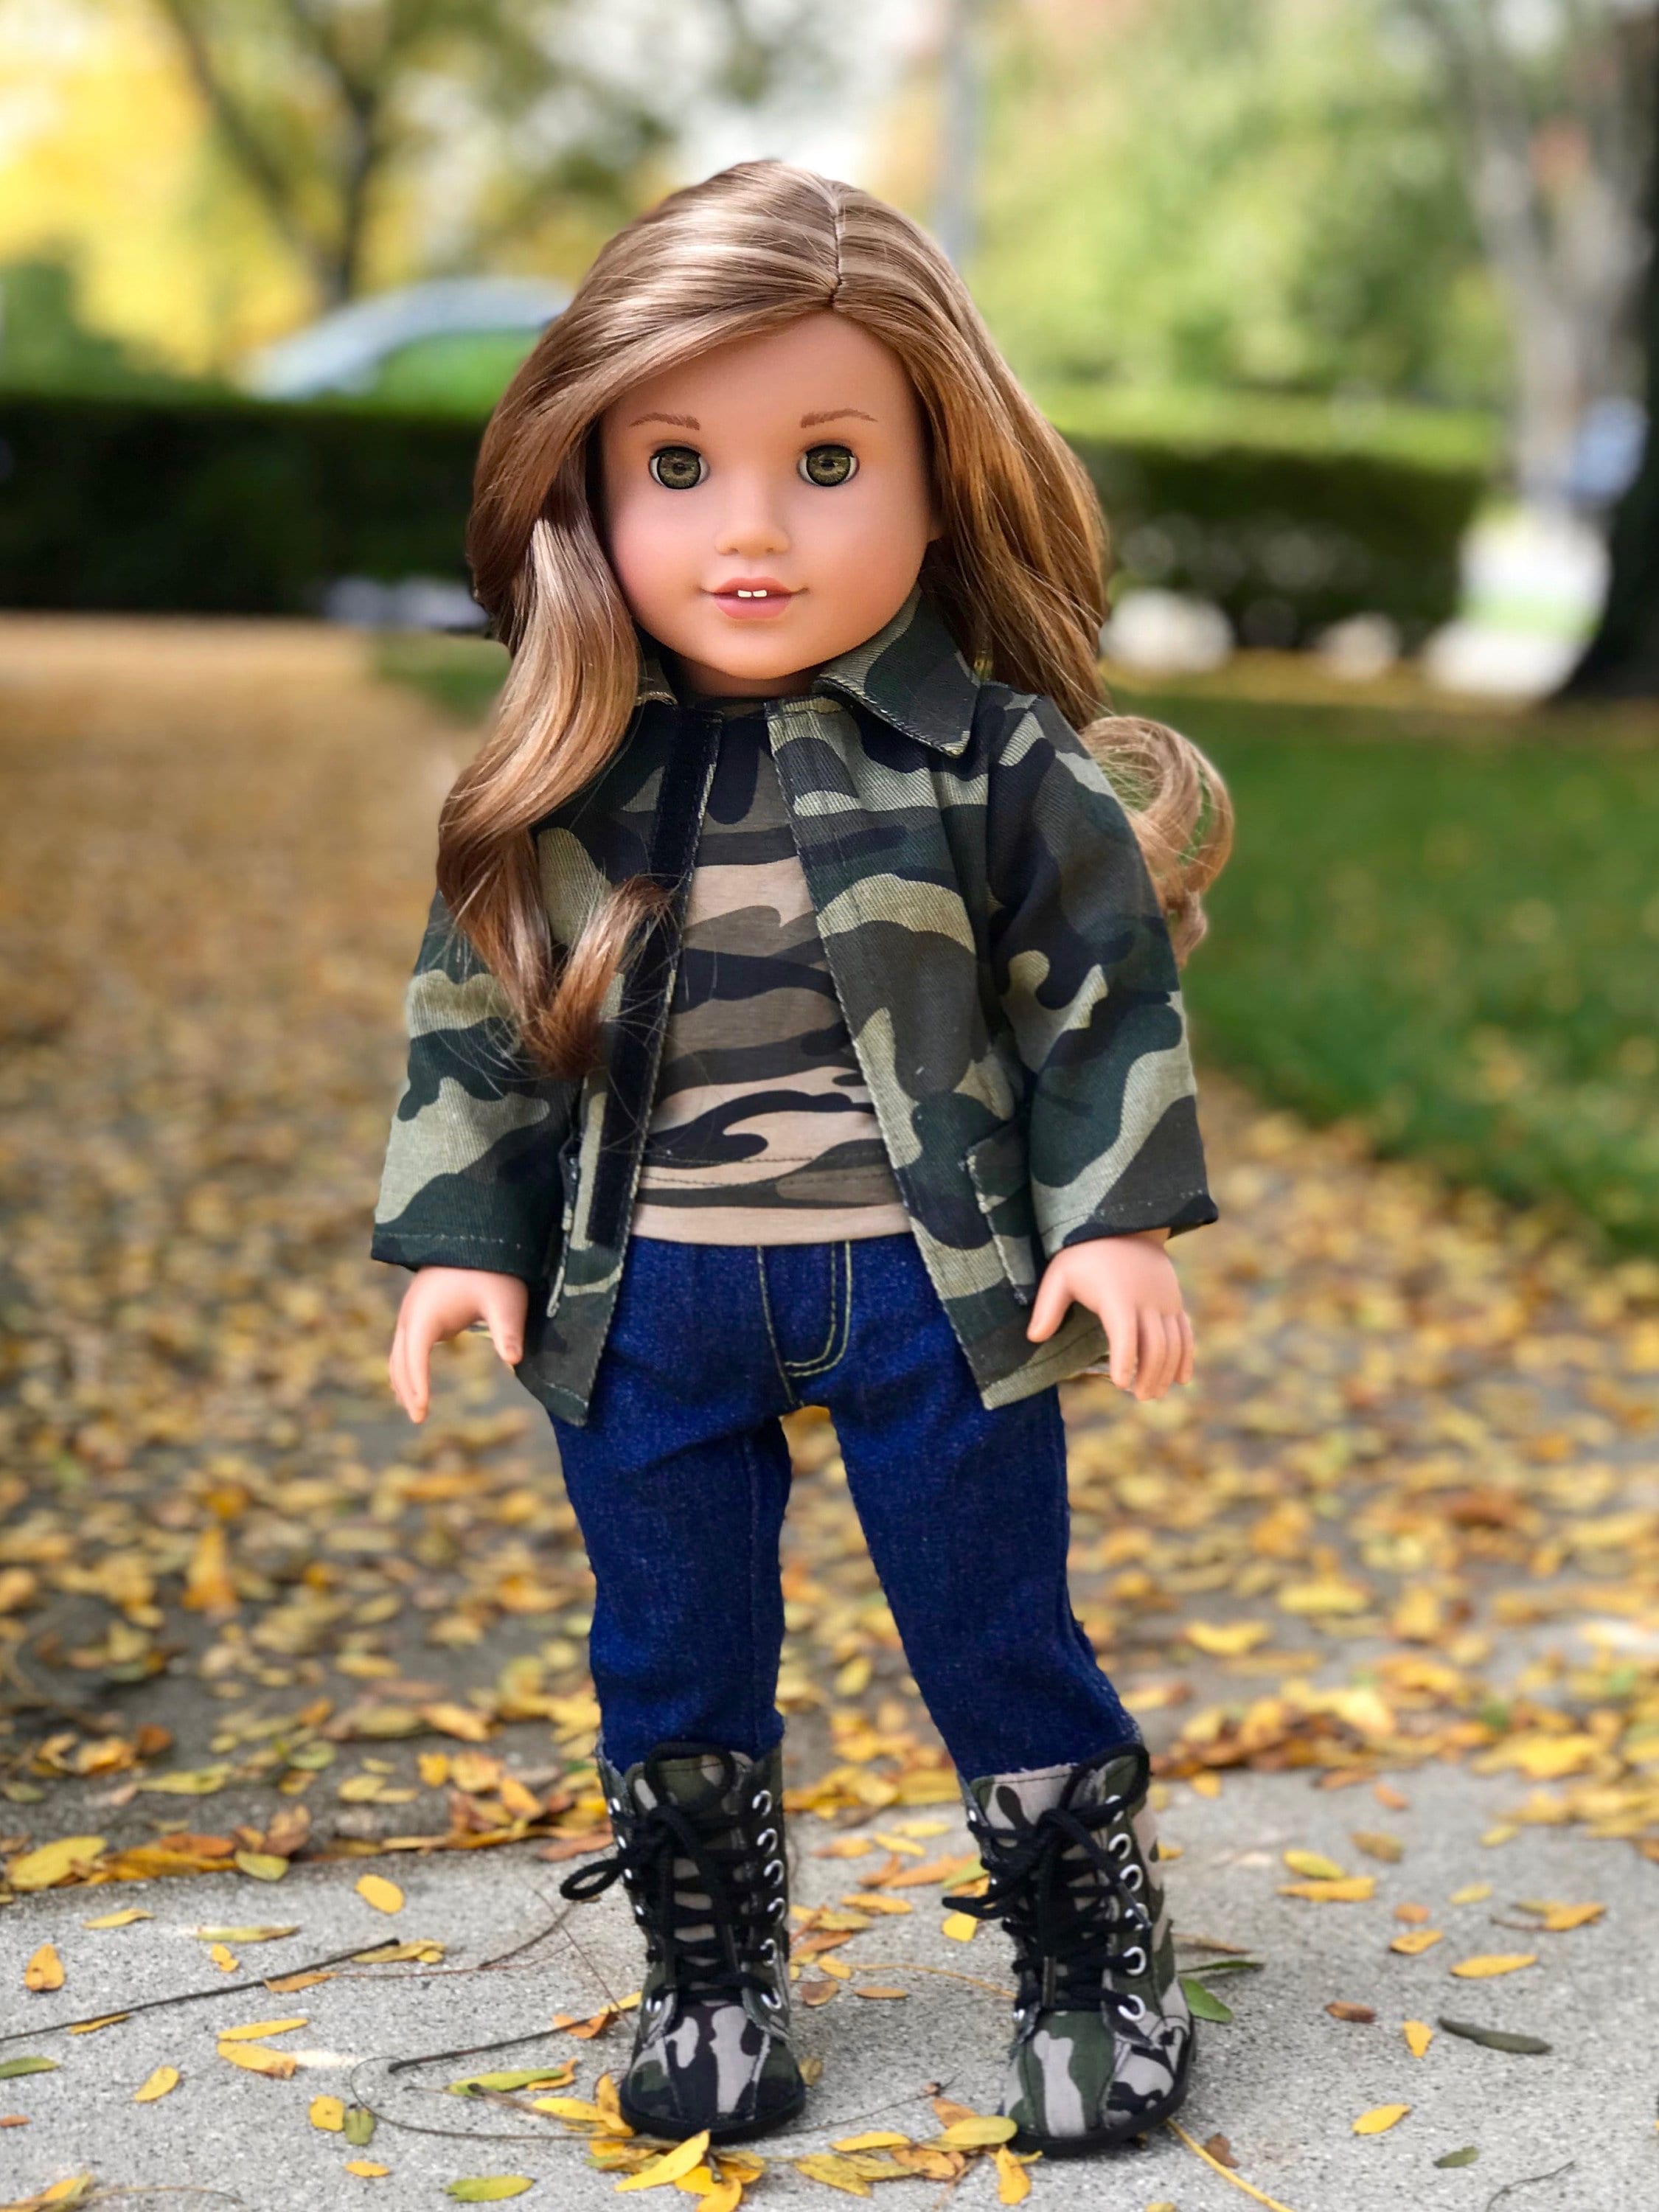 18 " Dolls 4 Pc Army Outfit With Hat & Flag fits American Girl Boy Doll Logan 